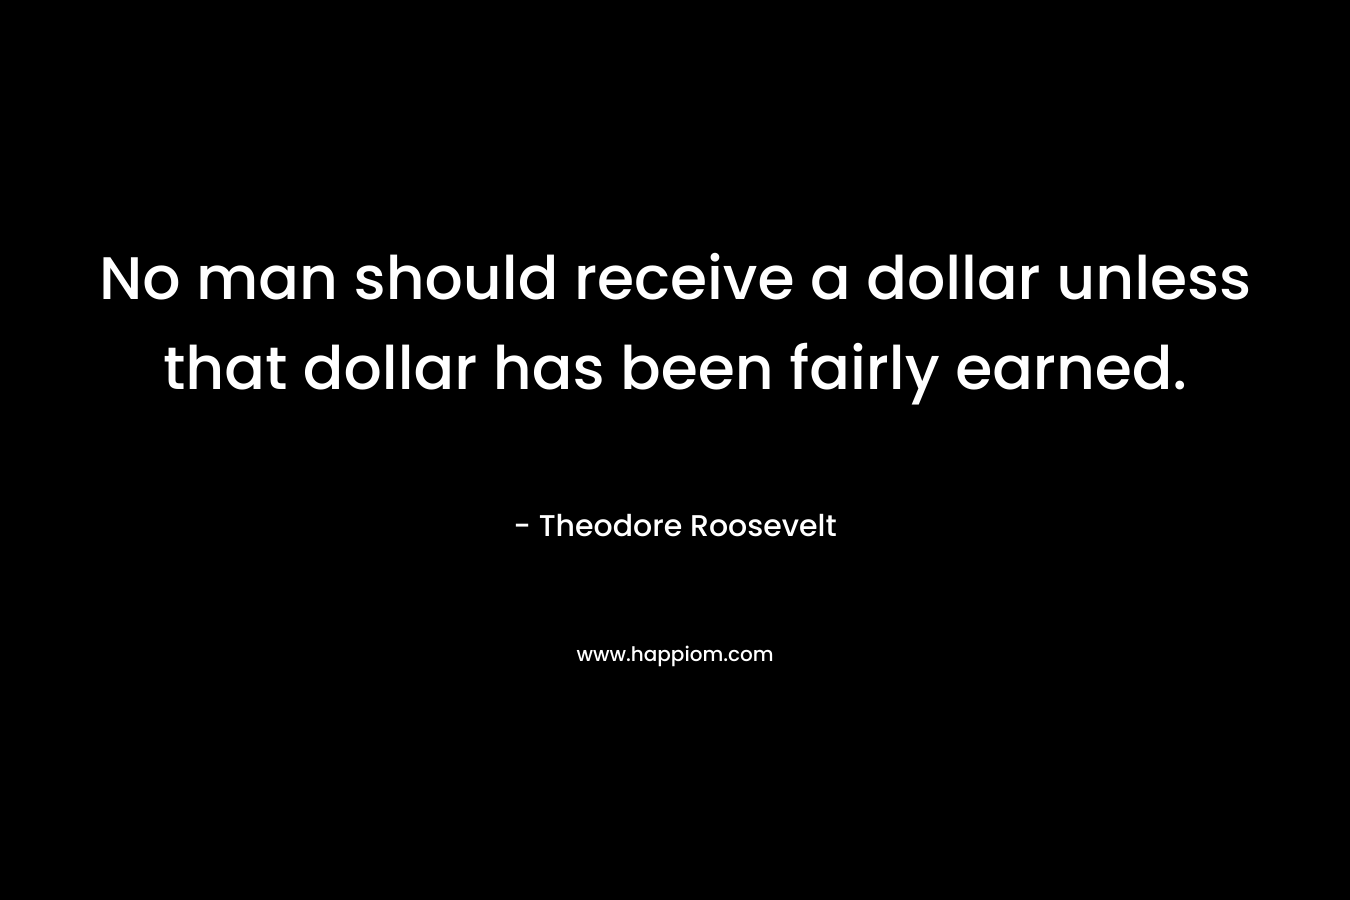 No man should receive a dollar unless that dollar has been fairly earned.